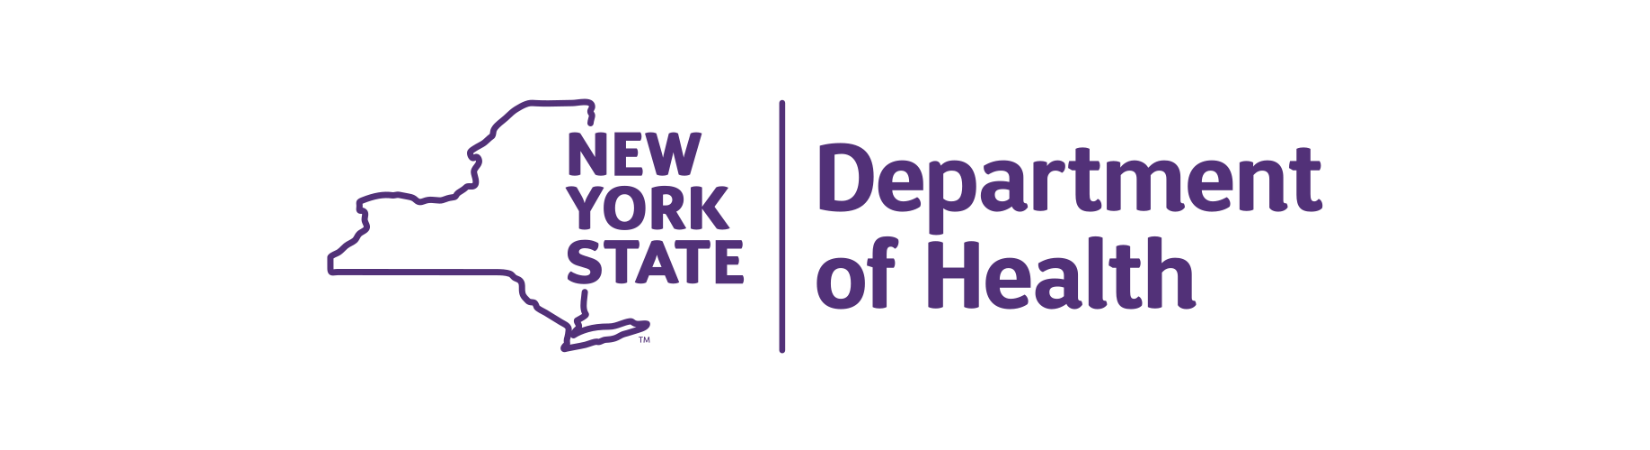 NYS Department of Health logo